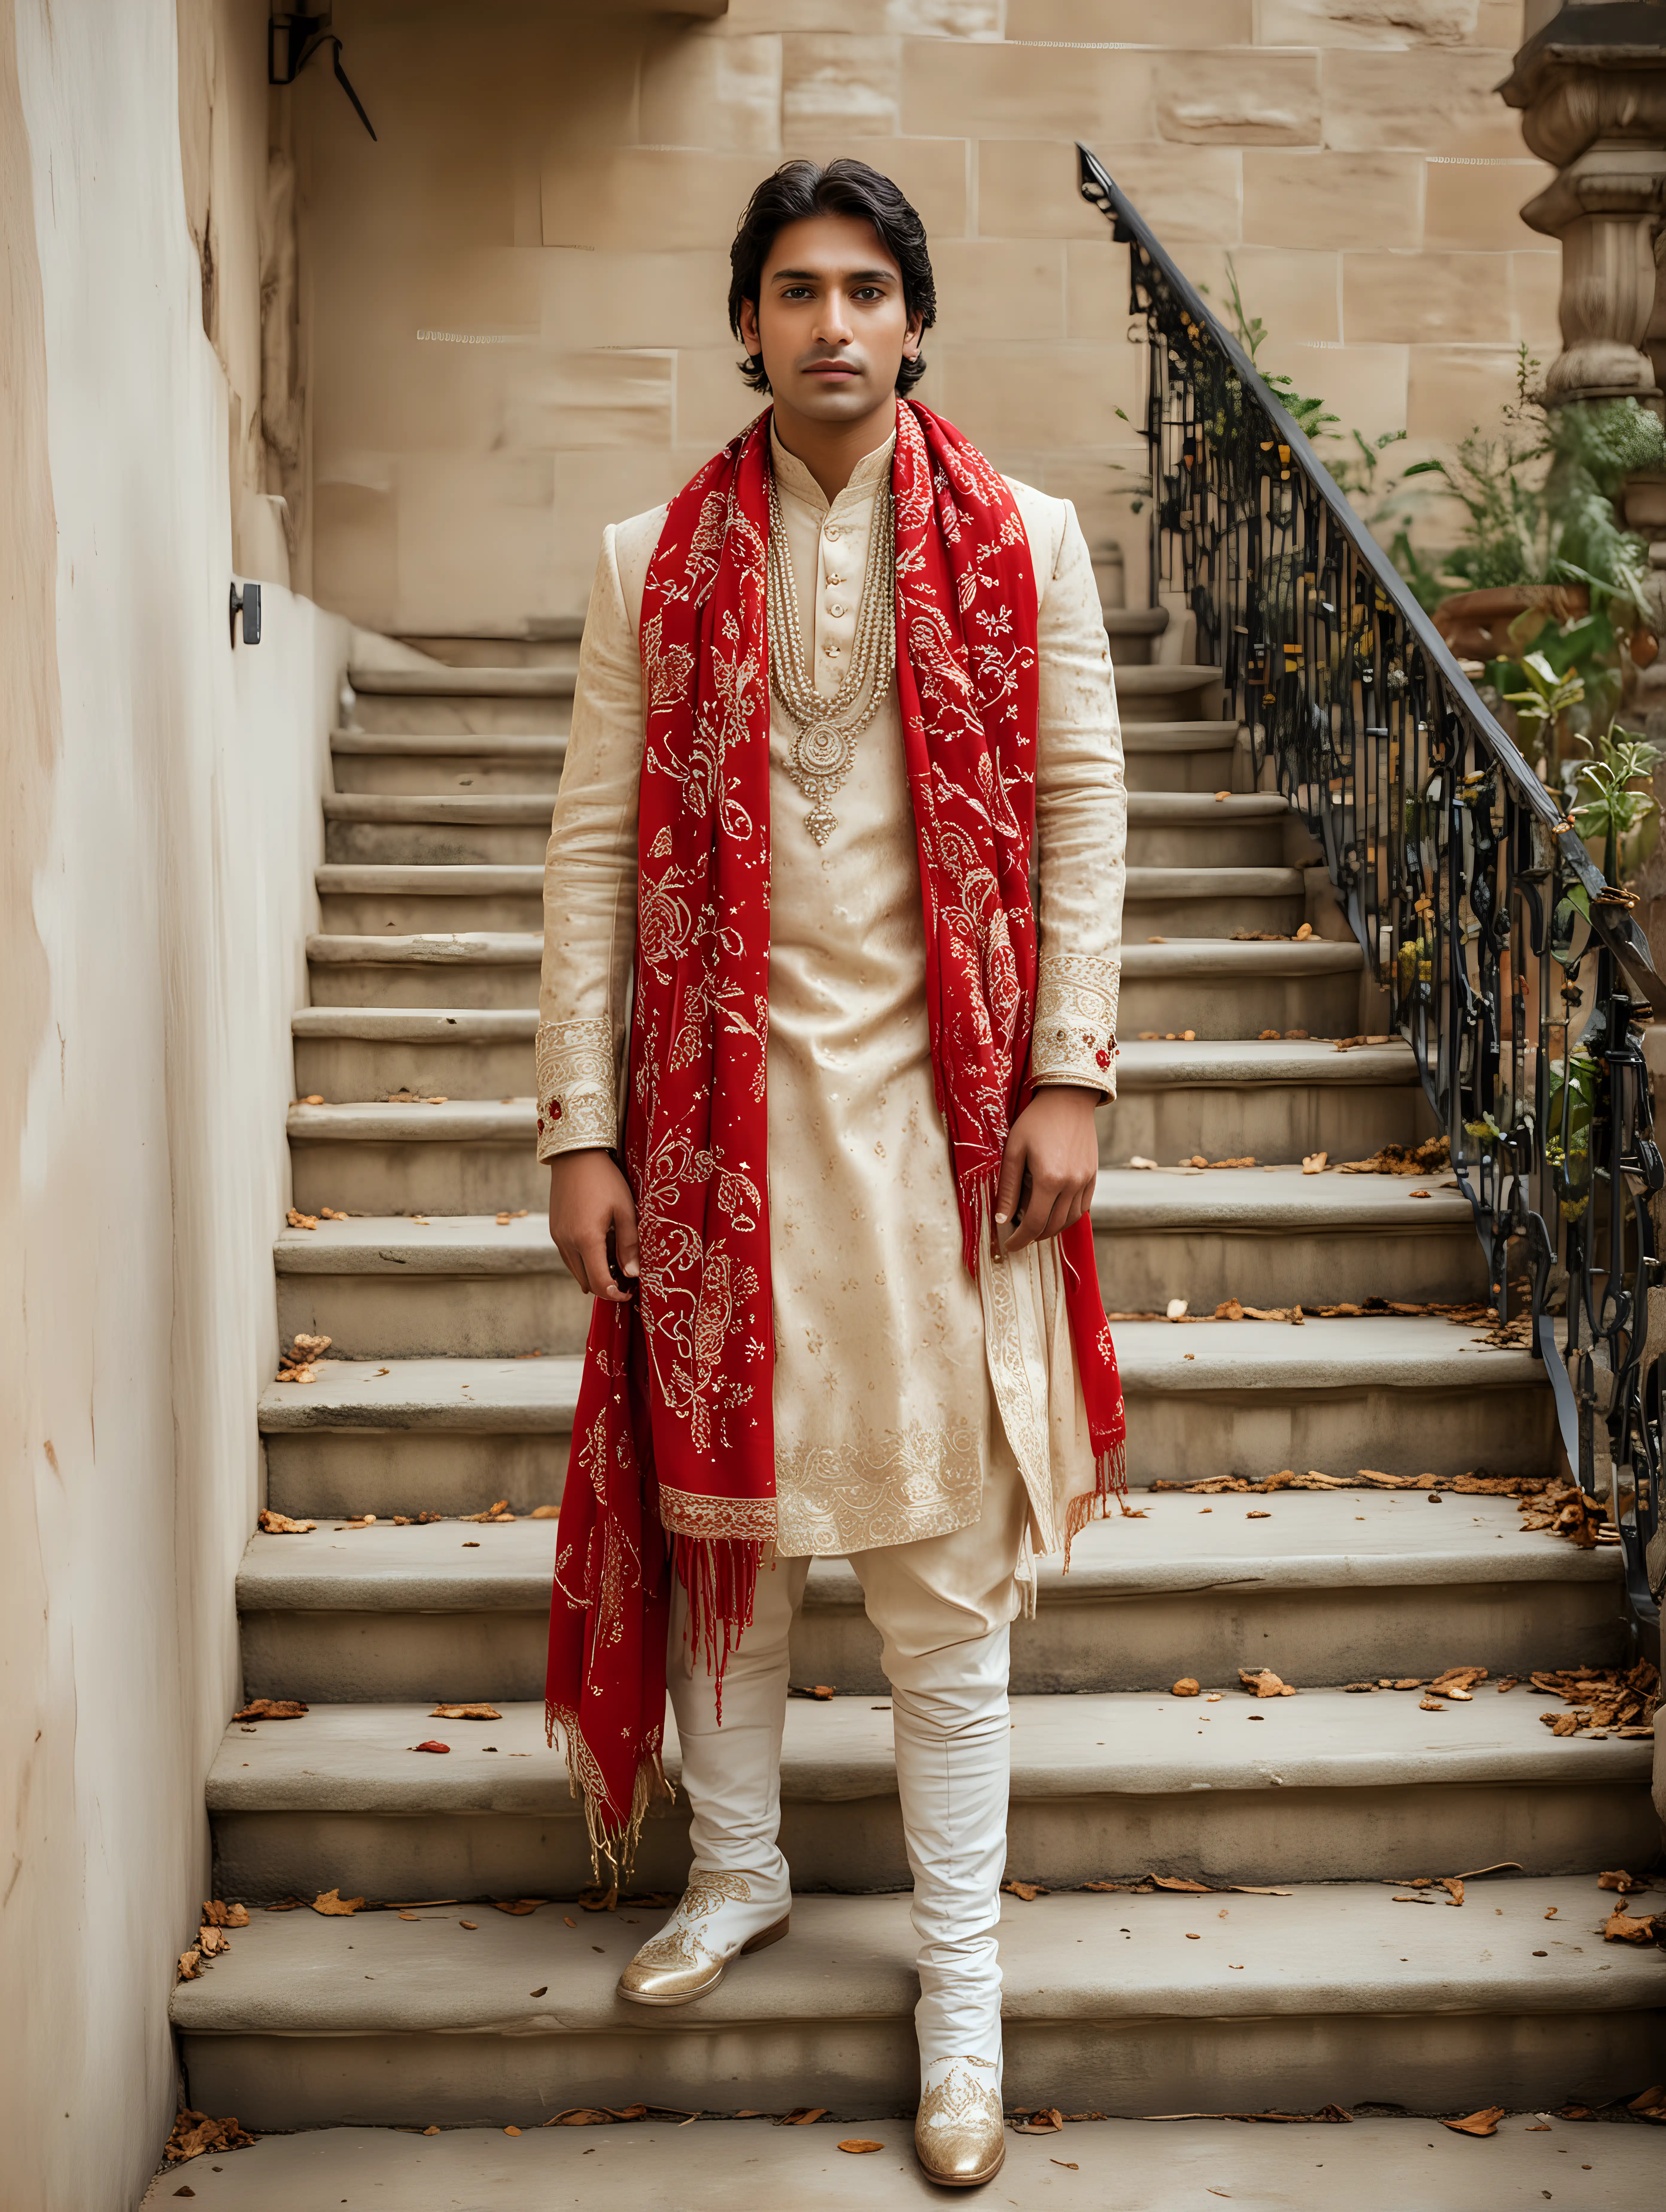 A man in beige and red Indian wedding attire, Around 26 years old，facing the camera, exquisite facial features, matching shawl, white boots, he is standing against a stone staircase in vibrant colors wearing traditional attire